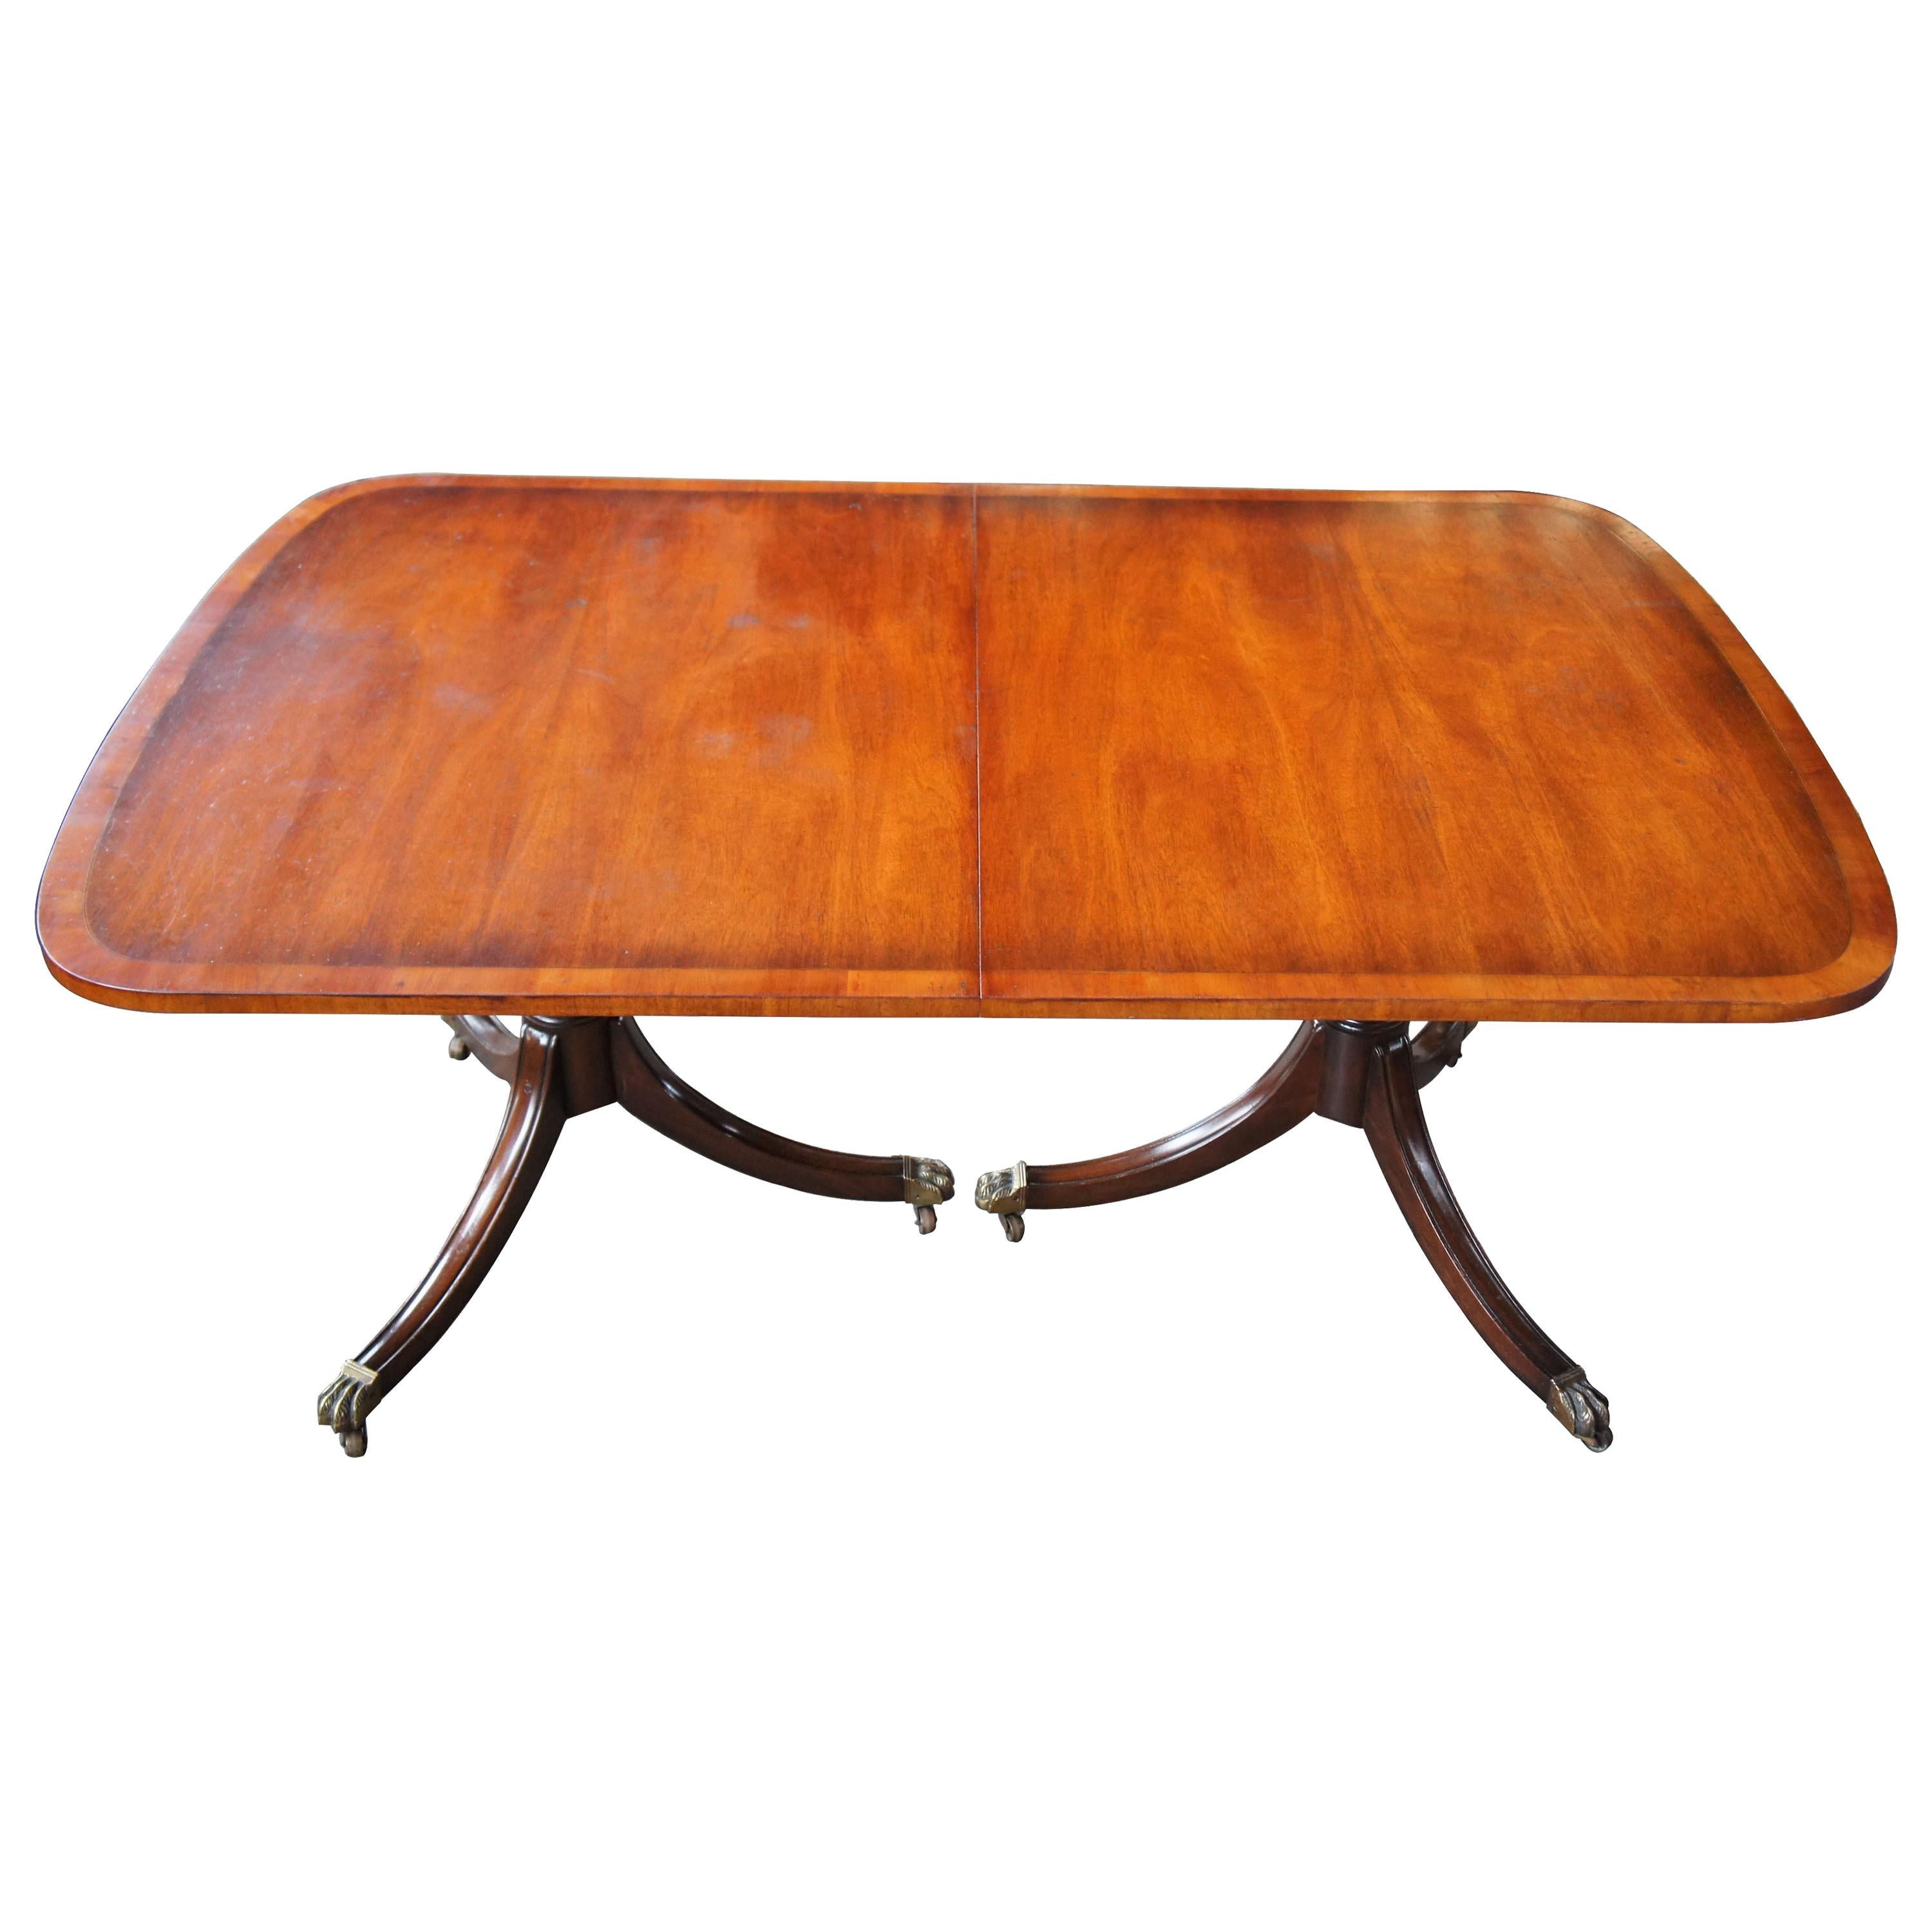 Kittinger Antique Duncan Phyfe Style Banded Mahogany Dining Table Claw Feet At 1stdibs